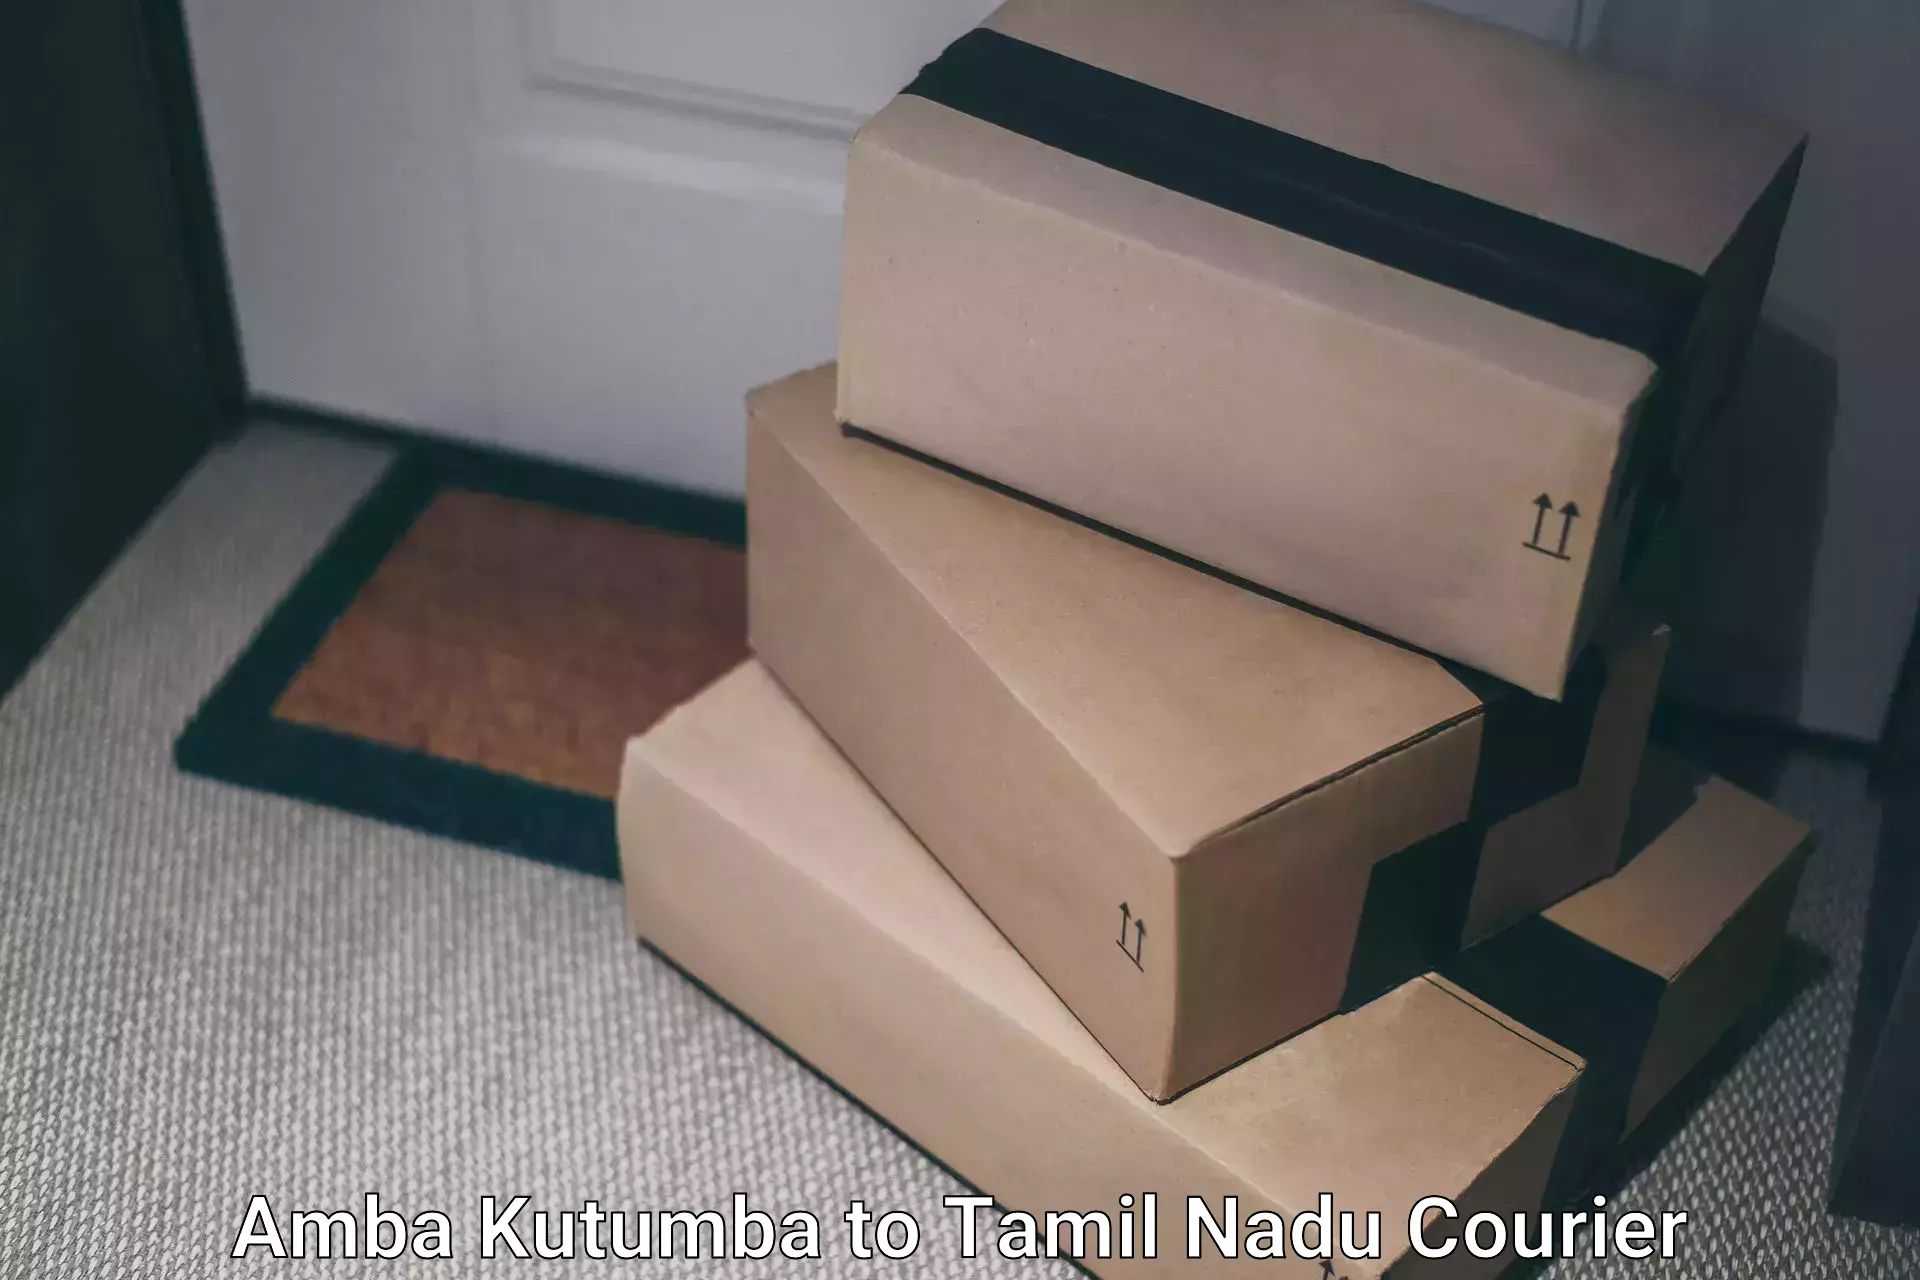 Express delivery solutions Amba Kutumba to Tamil Nadu